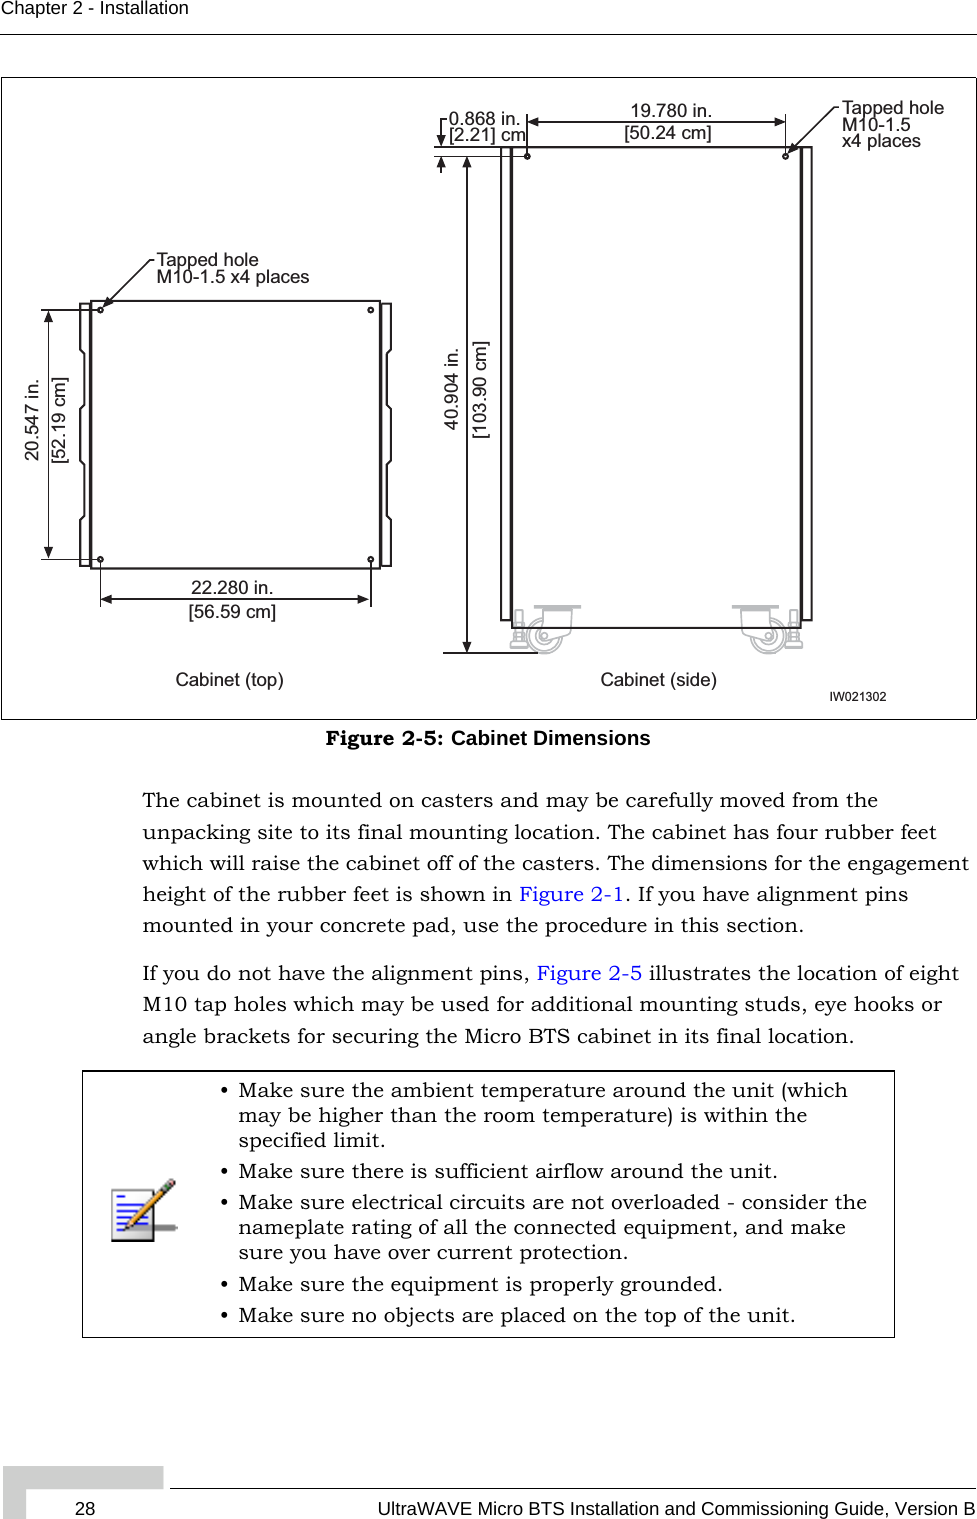 28 UltraWAVE Micro BTS Installation and Commissioning Guide, Version BChapter 2 - InstallationThe cabinet is mounted on casters and may be carefully moved from the unpacking site to its final mounting location. The cabinet has four rubber feet which will raise the cabinet off of the casters. The dimensions for the engagement height of the rubber feet is shown in Figure 2-1. If you have alignment pins mounted in your concrete pad, use the procedure in this section.If you do not have the alignment pins, Figure 2-5 illustrates the location of eight M10 tap holes which may be used for additional mounting studs, eye hooks or angle brackets for securing the Micro BTS cabinet in its final location.Figure 2-5: Cabinet Dimensions• Make sure the ambient temperature around the unit (which may be higher than the room temperature) is within the specified limit.• Make sure there is sufficient airflow around the unit.• Make sure electrical circuits are not overloaded - consider the nameplate rating of all the connected equipment, and make sure you have over current protection.• Make sure the equipment is properly grounded.• Make sure no objects are placed on the top of the unit.22.280 in.[56.59 cm]20.547 in.[52.19 cm]Tapped holeM10-1.5 x4 places19.780 in.[50.24 cm]40.904 in.[103.90 cm]0.868 in. [2.21] cmCabinet (side)Cabinet (top)Tapped holeM10-1.5x4 placesIW021302